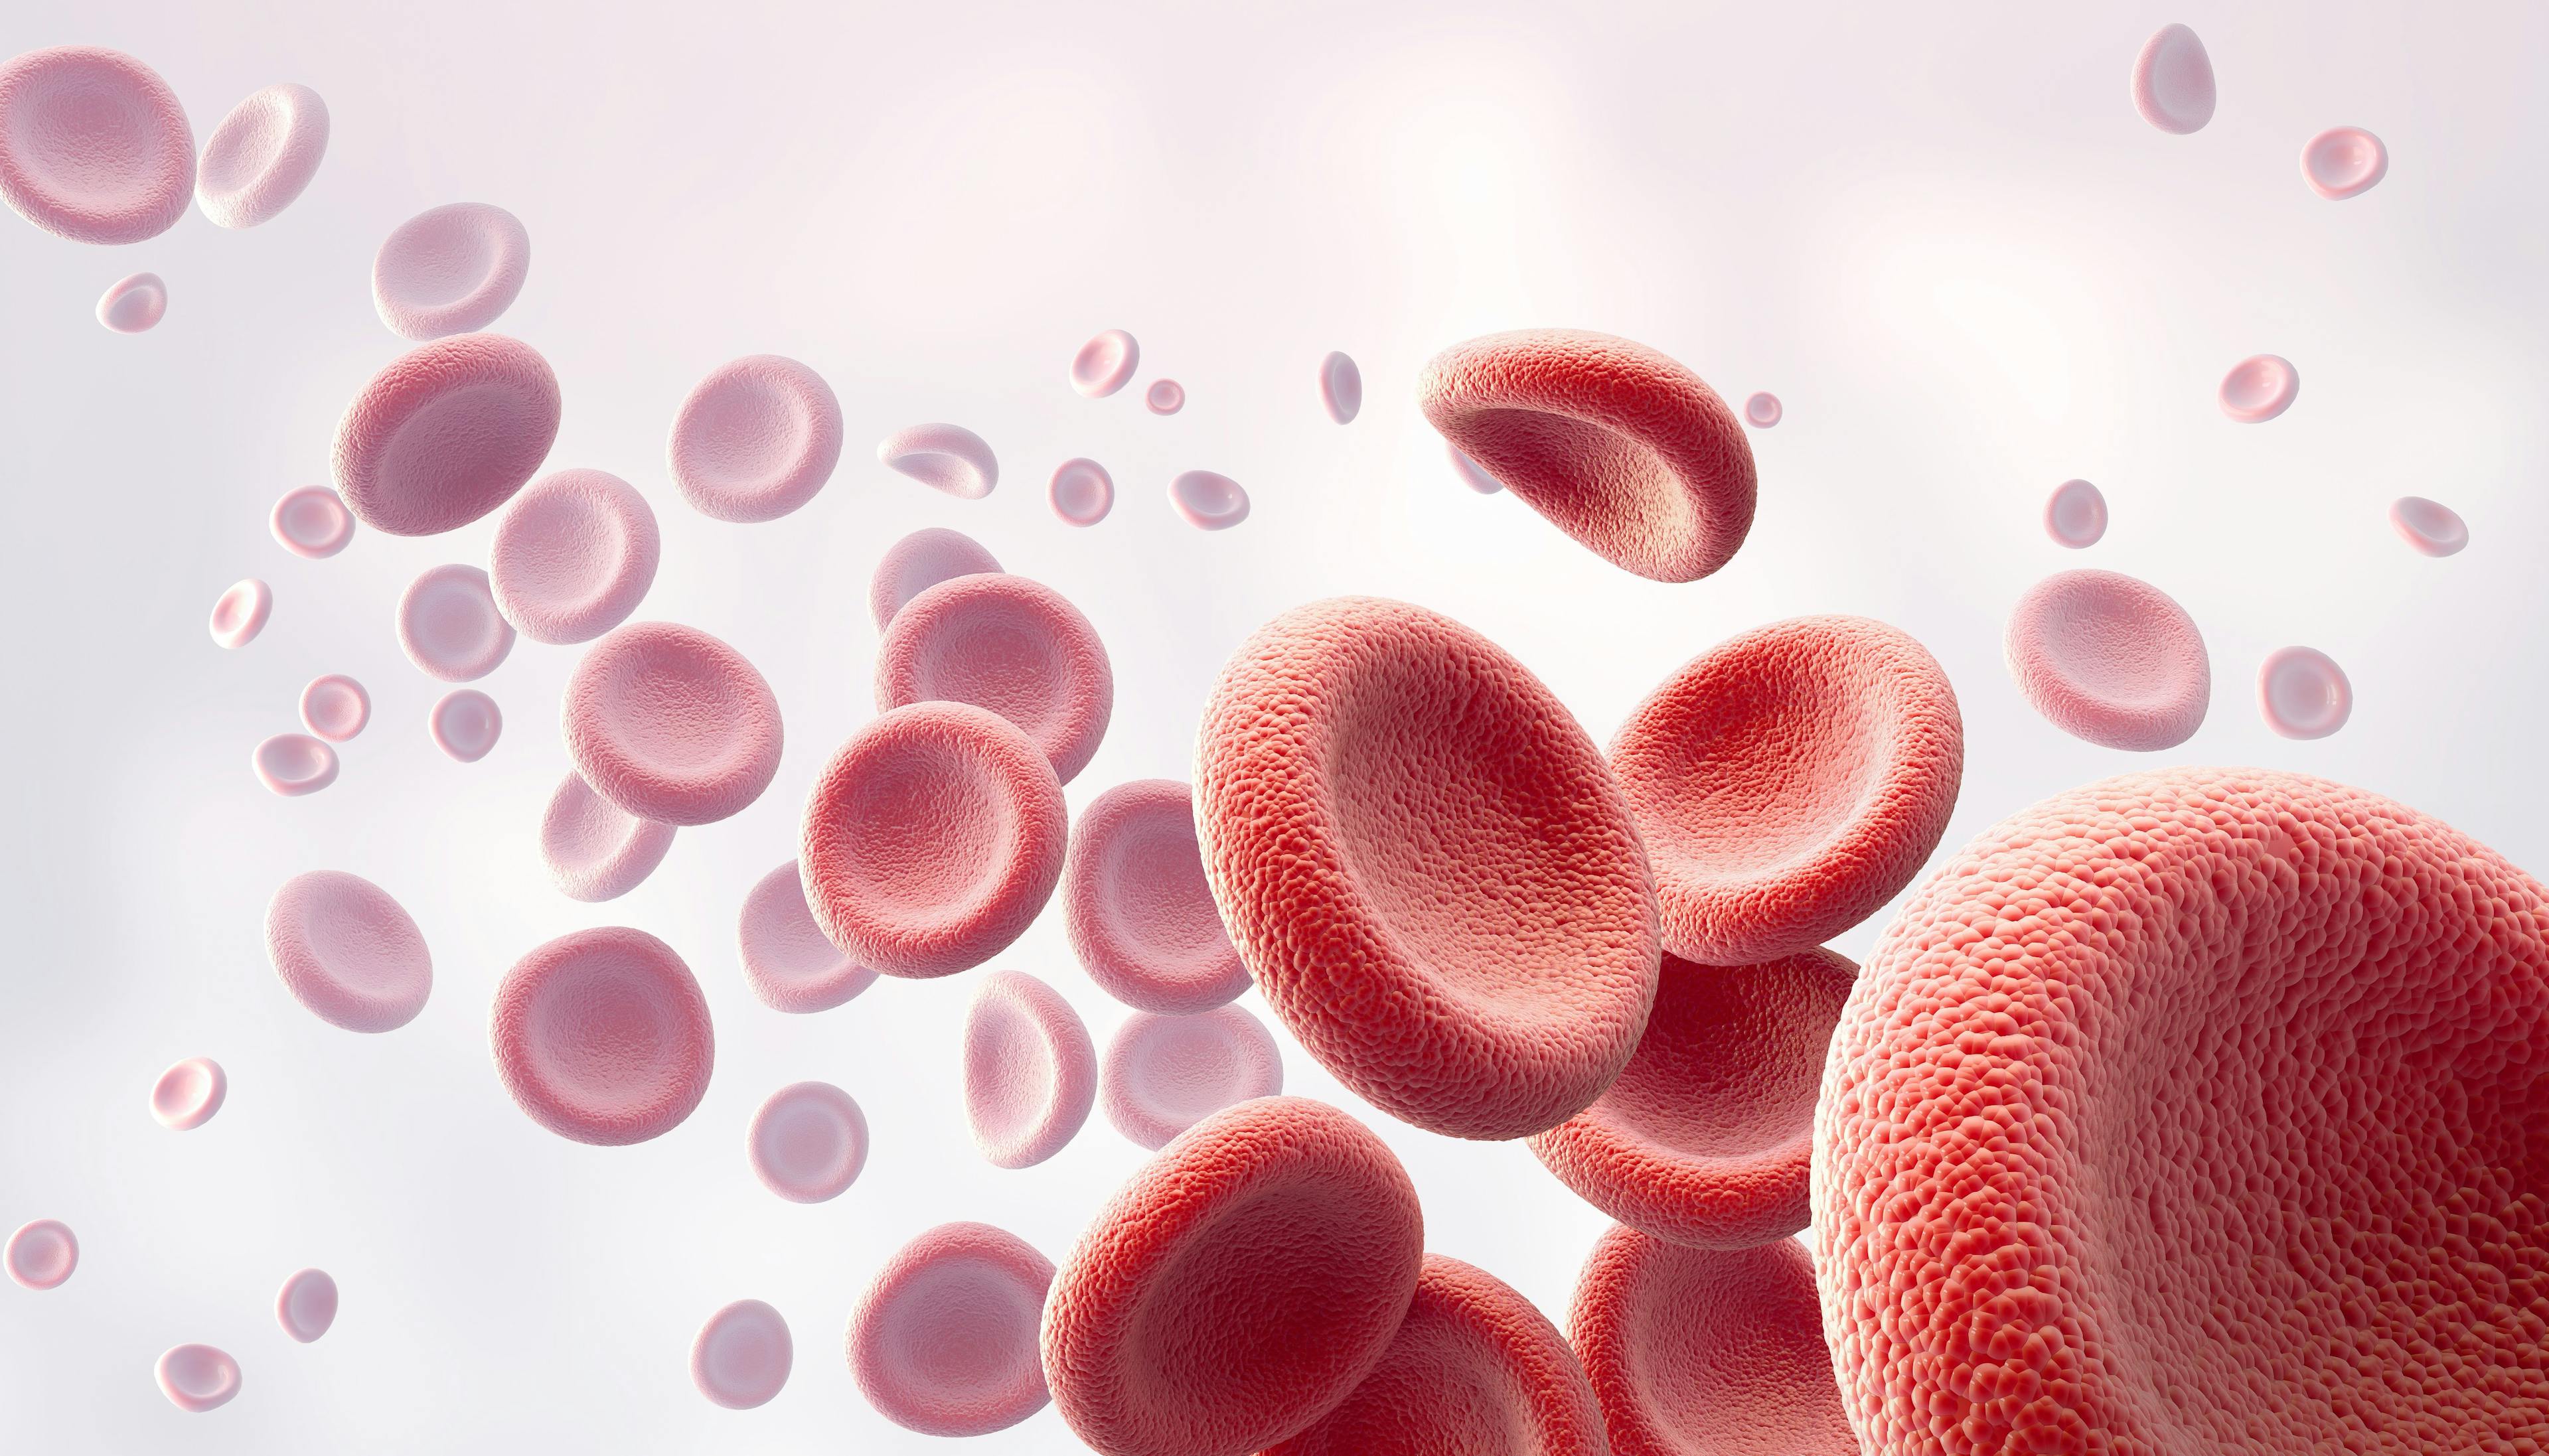 hematology and oncology | Image credit: Anusorn - stock.adobe.com